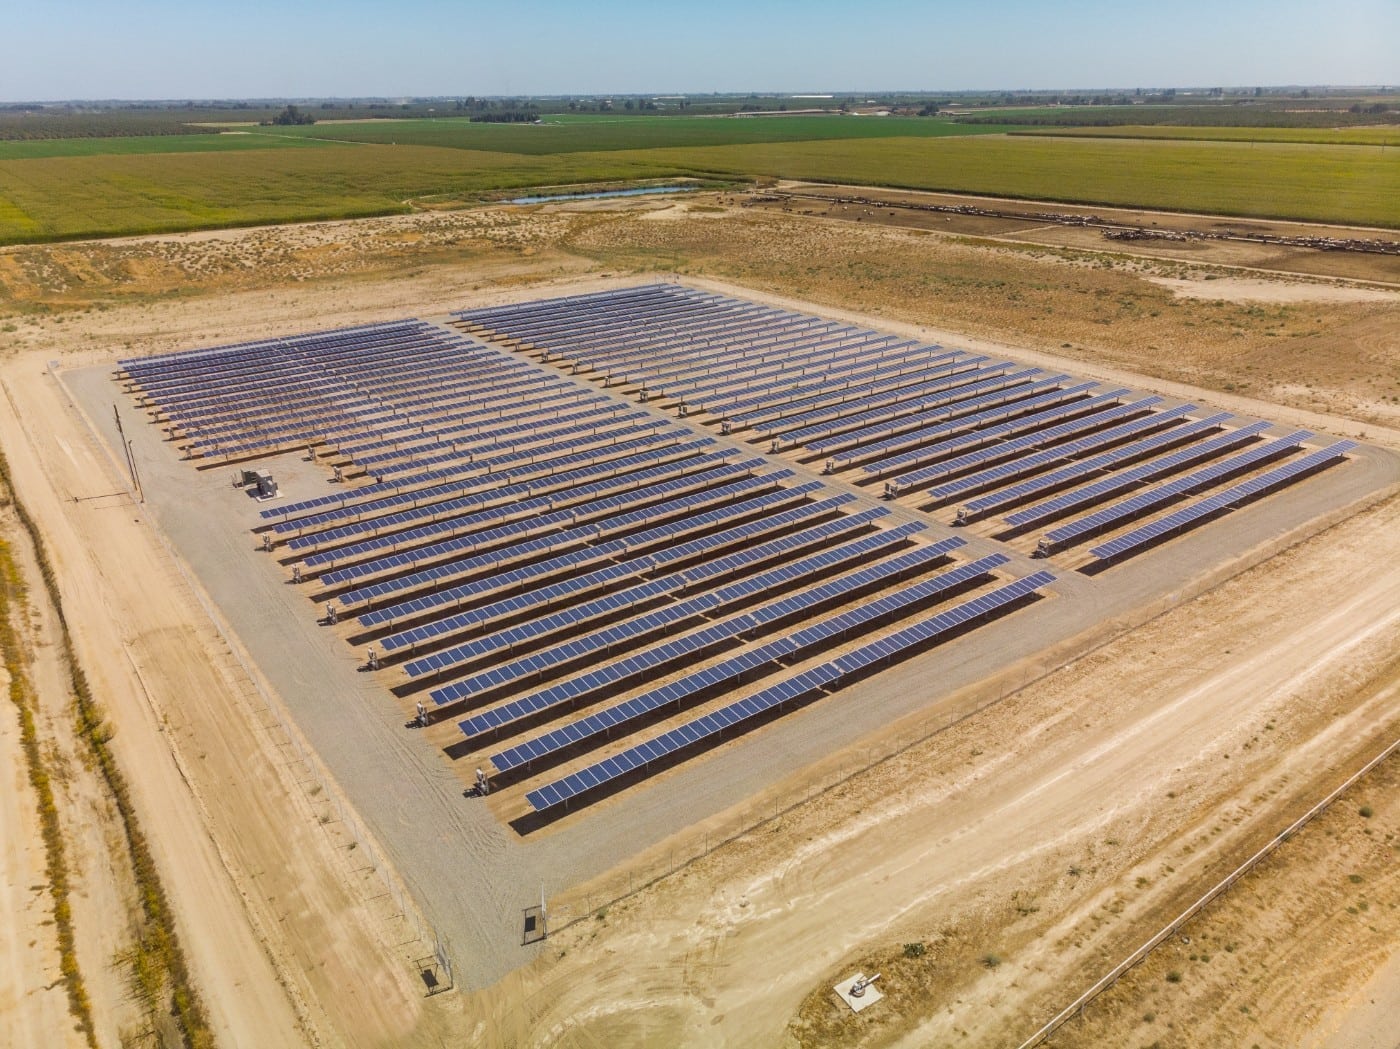 Aerial of large solar panel installation at a dairy farm surrounded by green crop fields in Chowchilla, California.